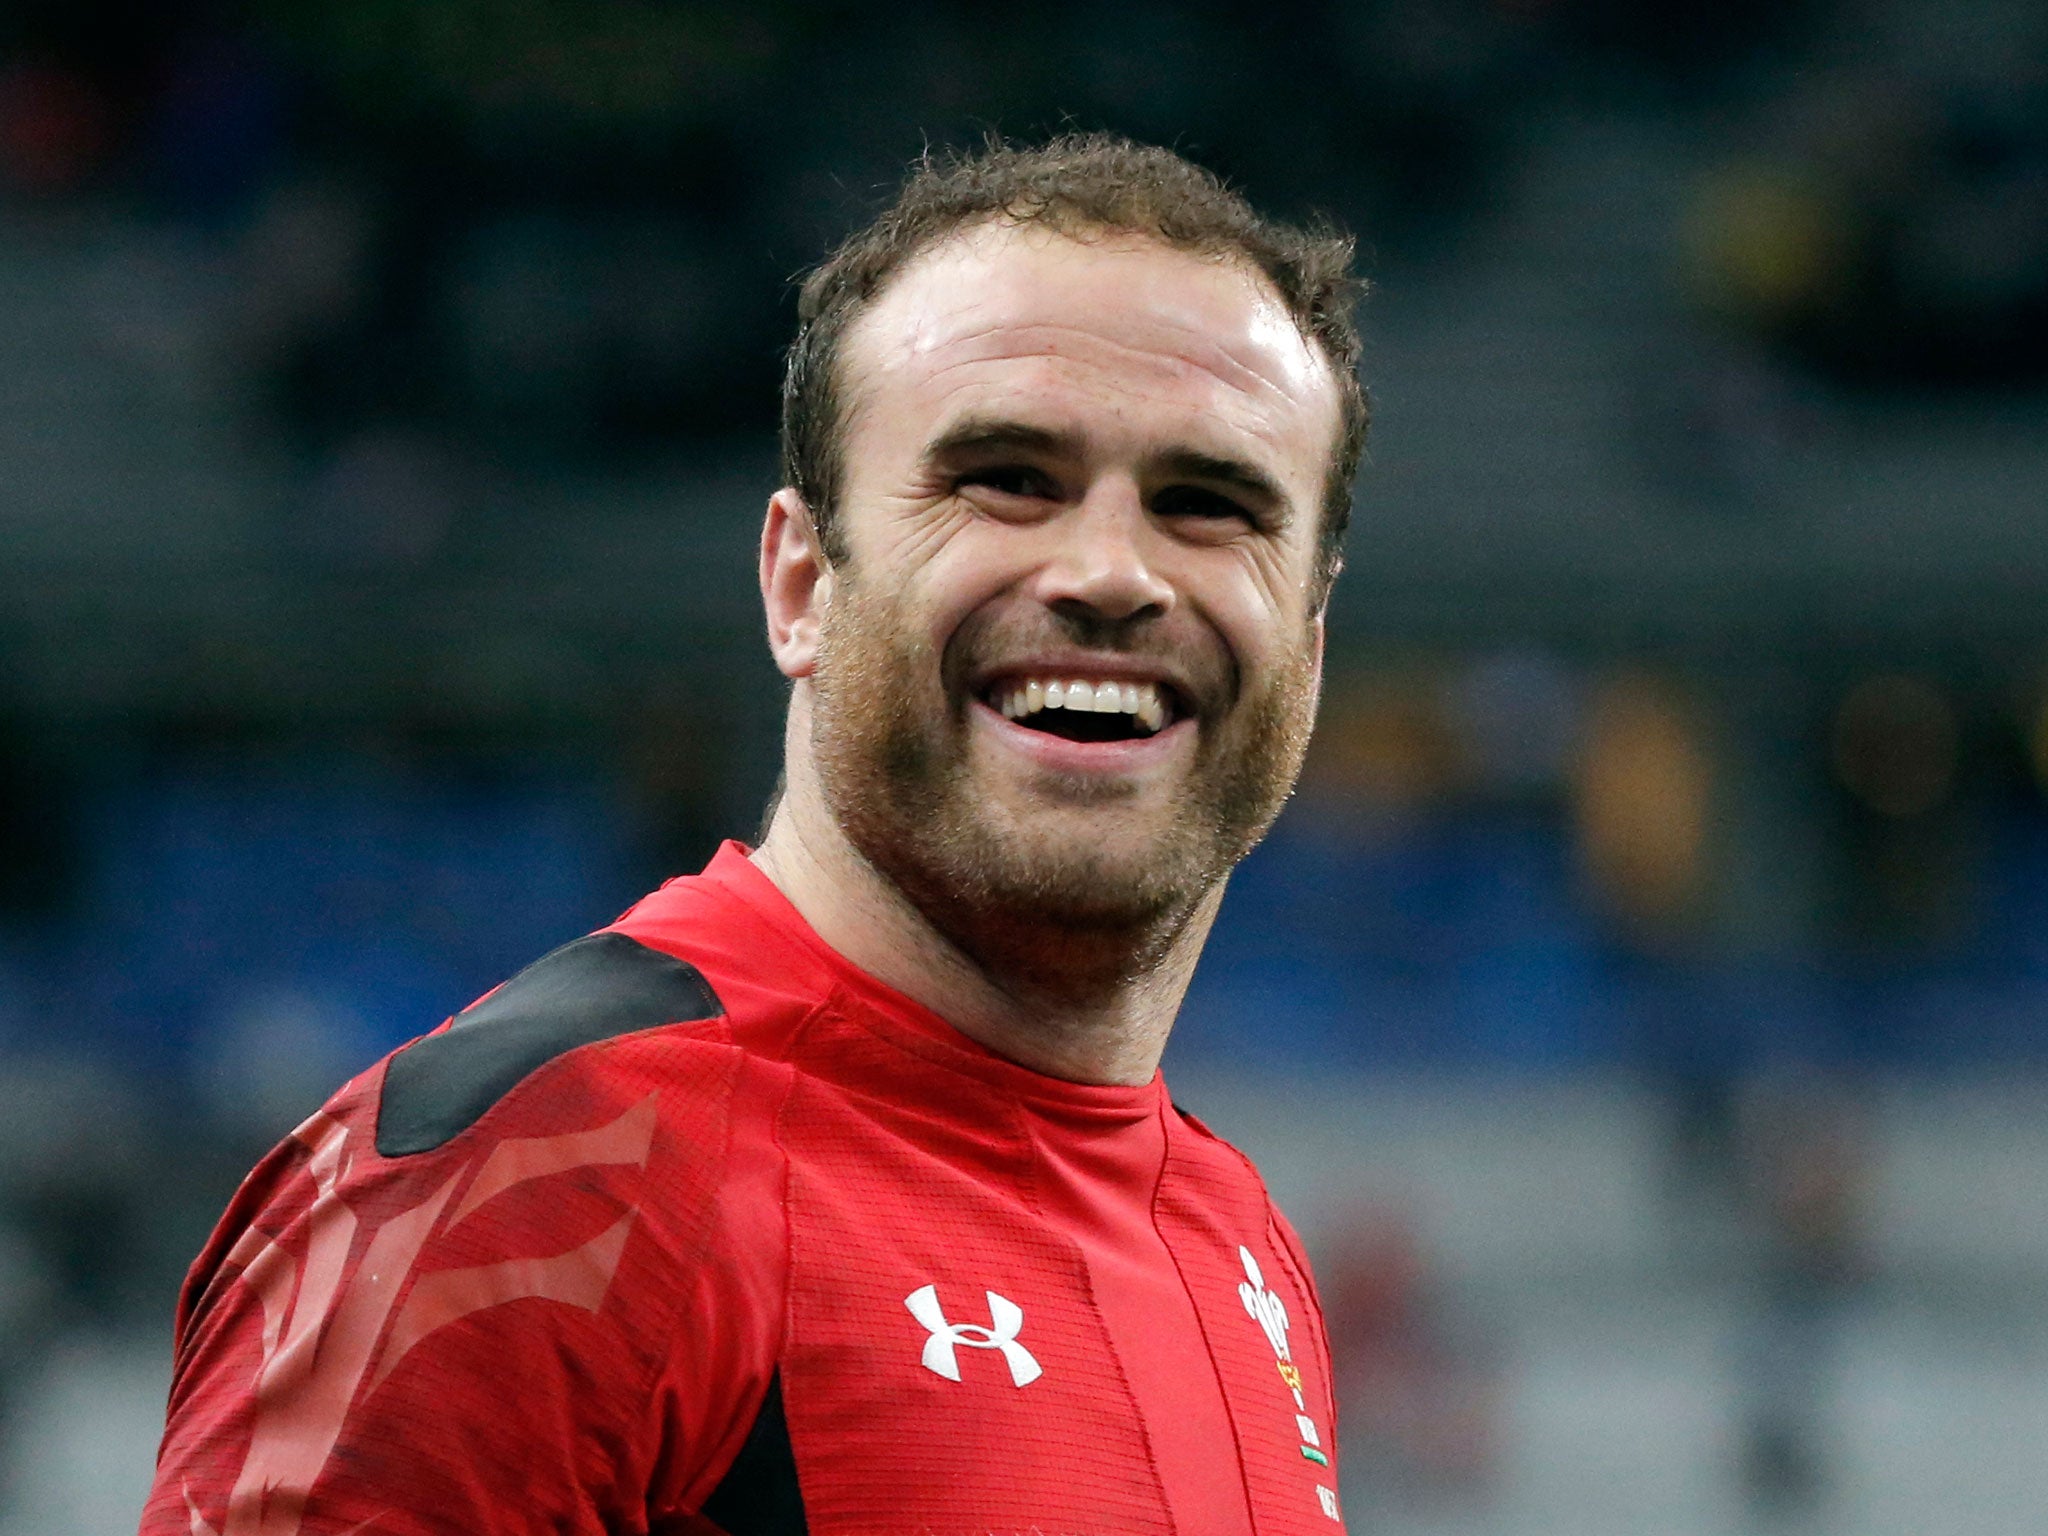 The Wales centre Jamie Roberts